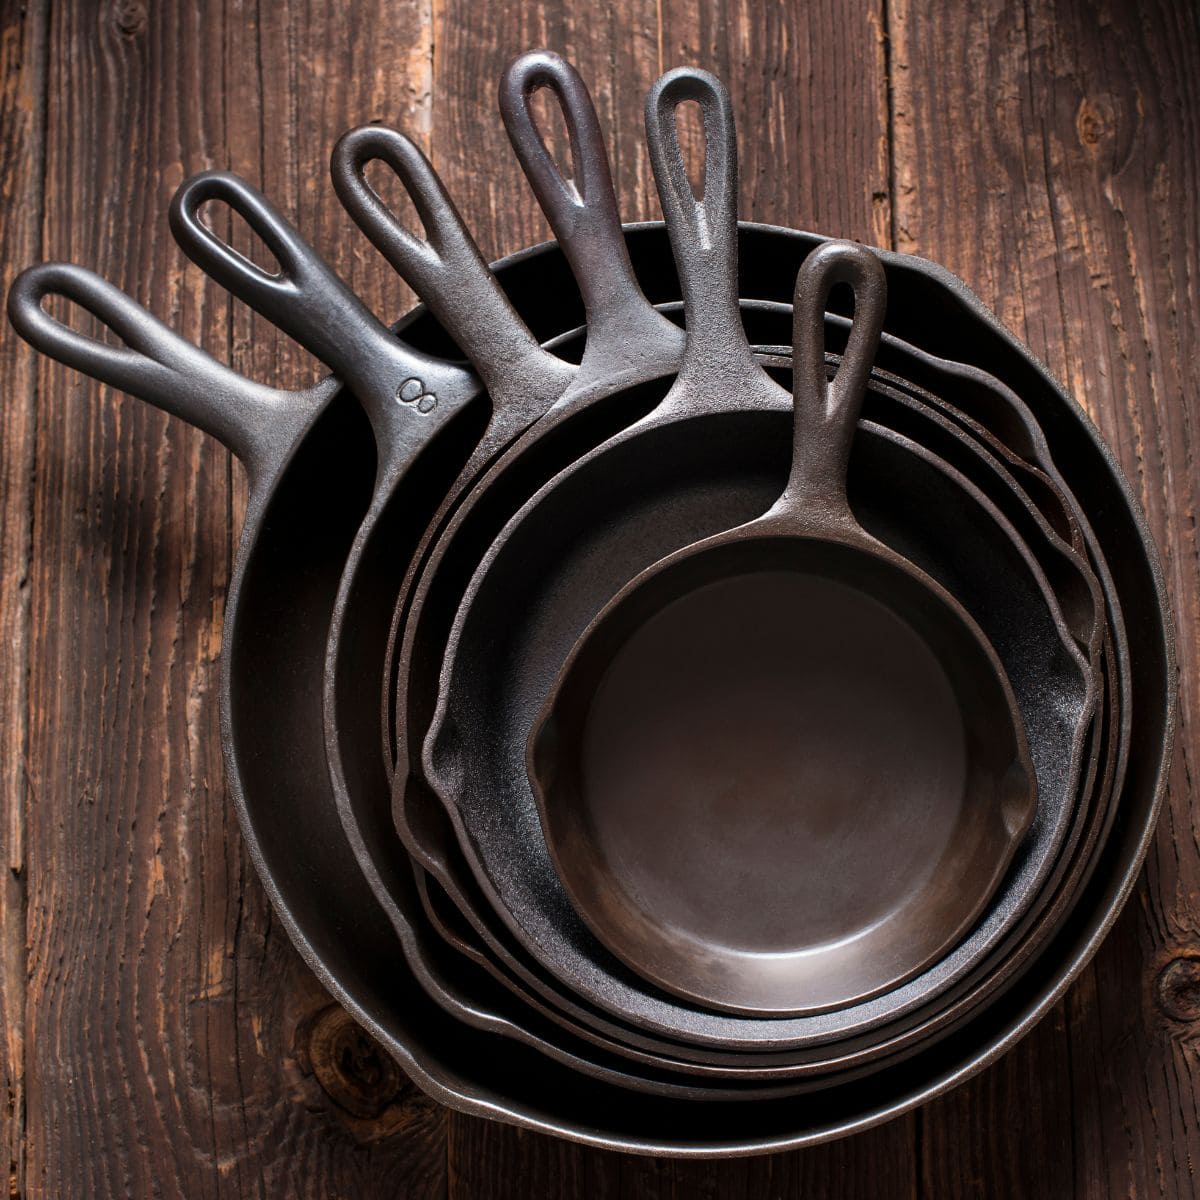 six cast iron pans in graduated sizes stacked one inside the other.